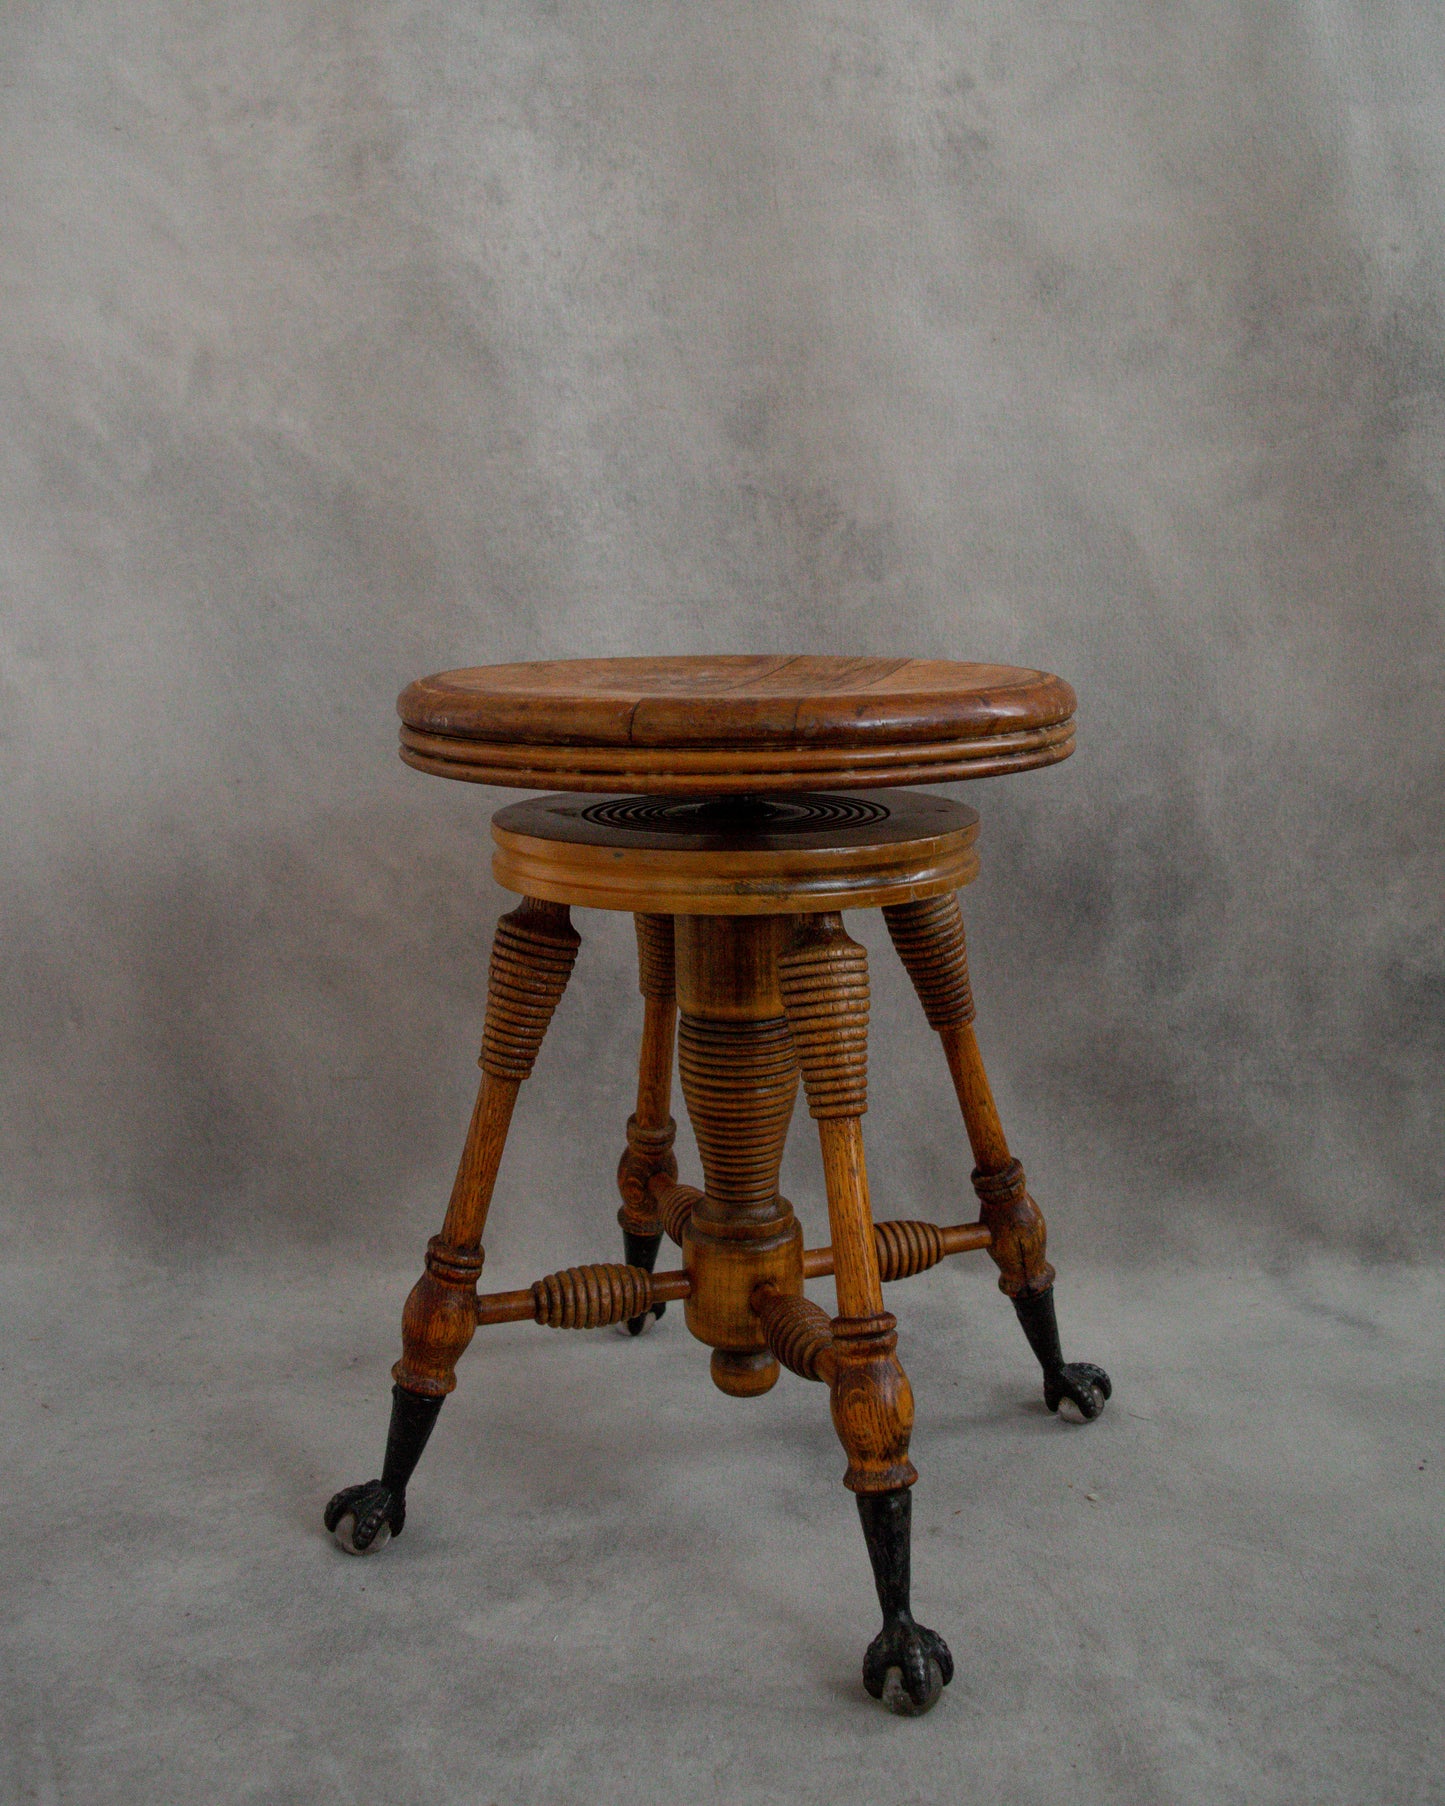 Vintage Wooden Piano Stool